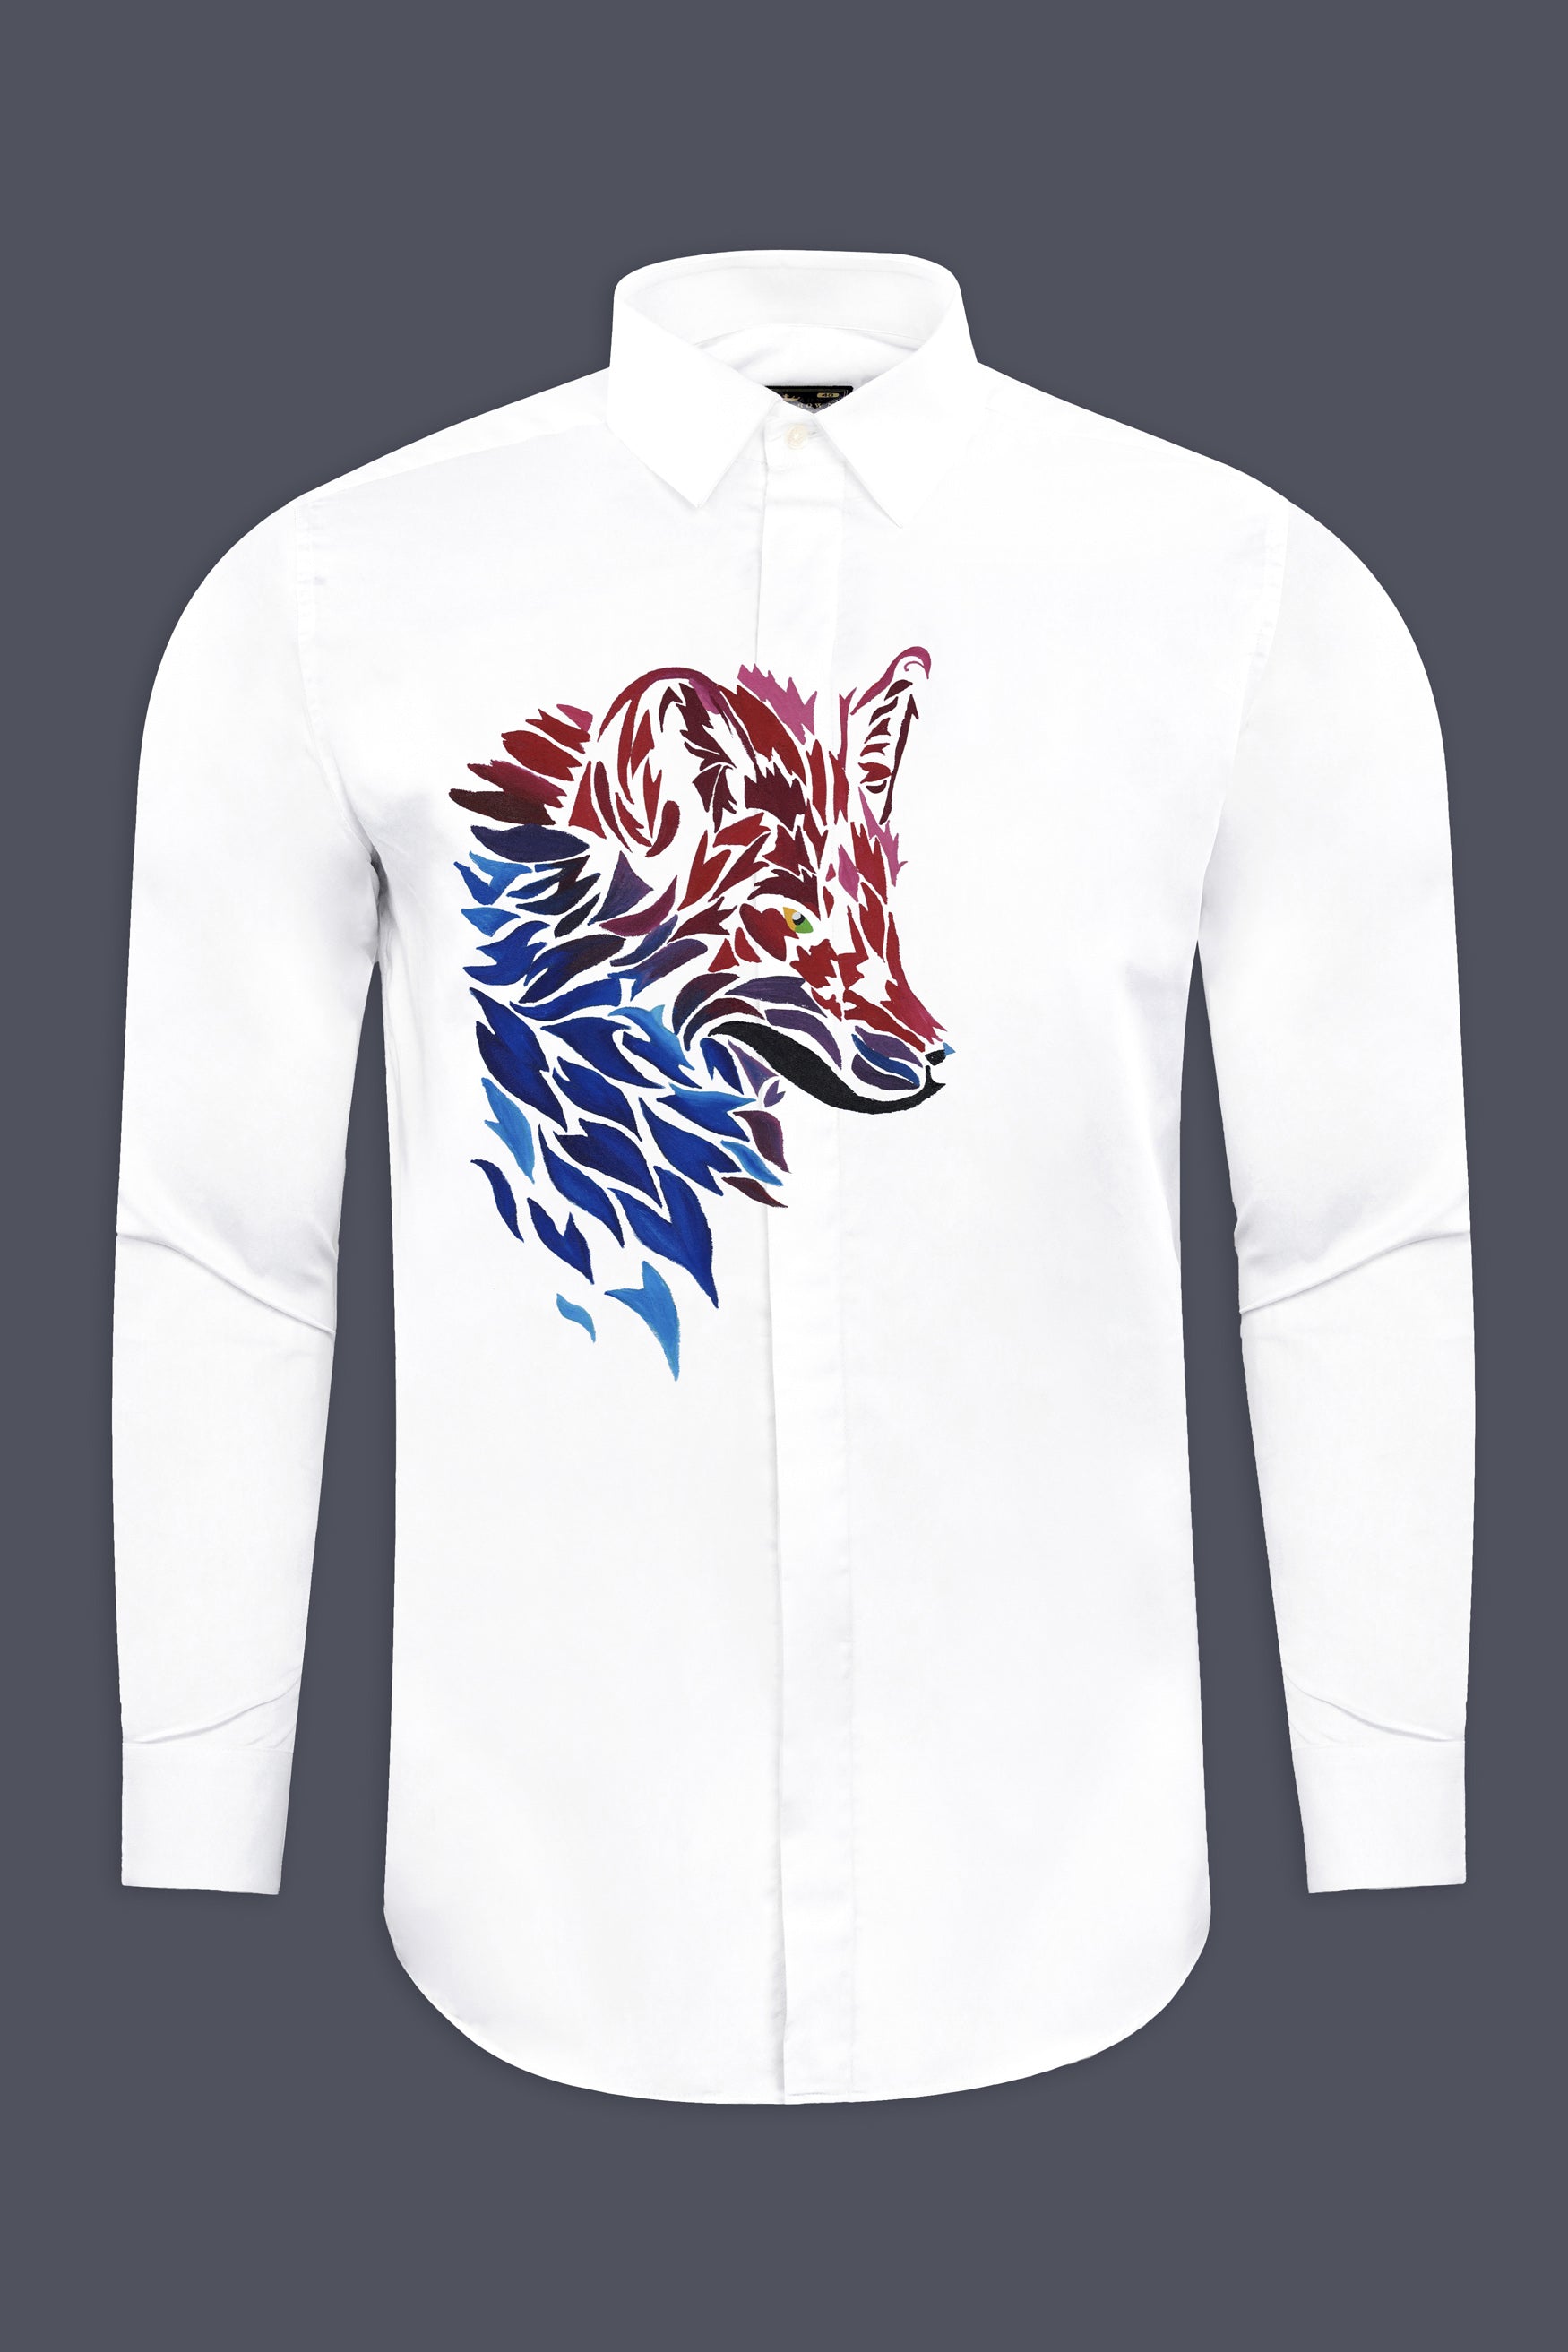 Bright White Aesthetic Wolf hand painted effect Printed Subtle Sheen Super Soft Premium Cotton Designer Shirt 12211-NP-P782-38, 12211-NP-P782-H-38, 12211-NP-P782-39, 12211-NP-P782-H-39, 12211-NP-P782-40, 12211-NP-P782-H-40, 12211-NP-P782-42, 12211-NP-P782-H-42, 12211-NP-P782-44, 12211-NP-P782-H-44, 12211-NP-P782-46, 12211-NP-P782-H-46, 12211-NP-P782-48, 12211-NP-P782-H-48, 12211-NP-P782-50, 12211-NP-P782-H-50, 12211-NP-P782-52, 12211-NP-P782-H-52